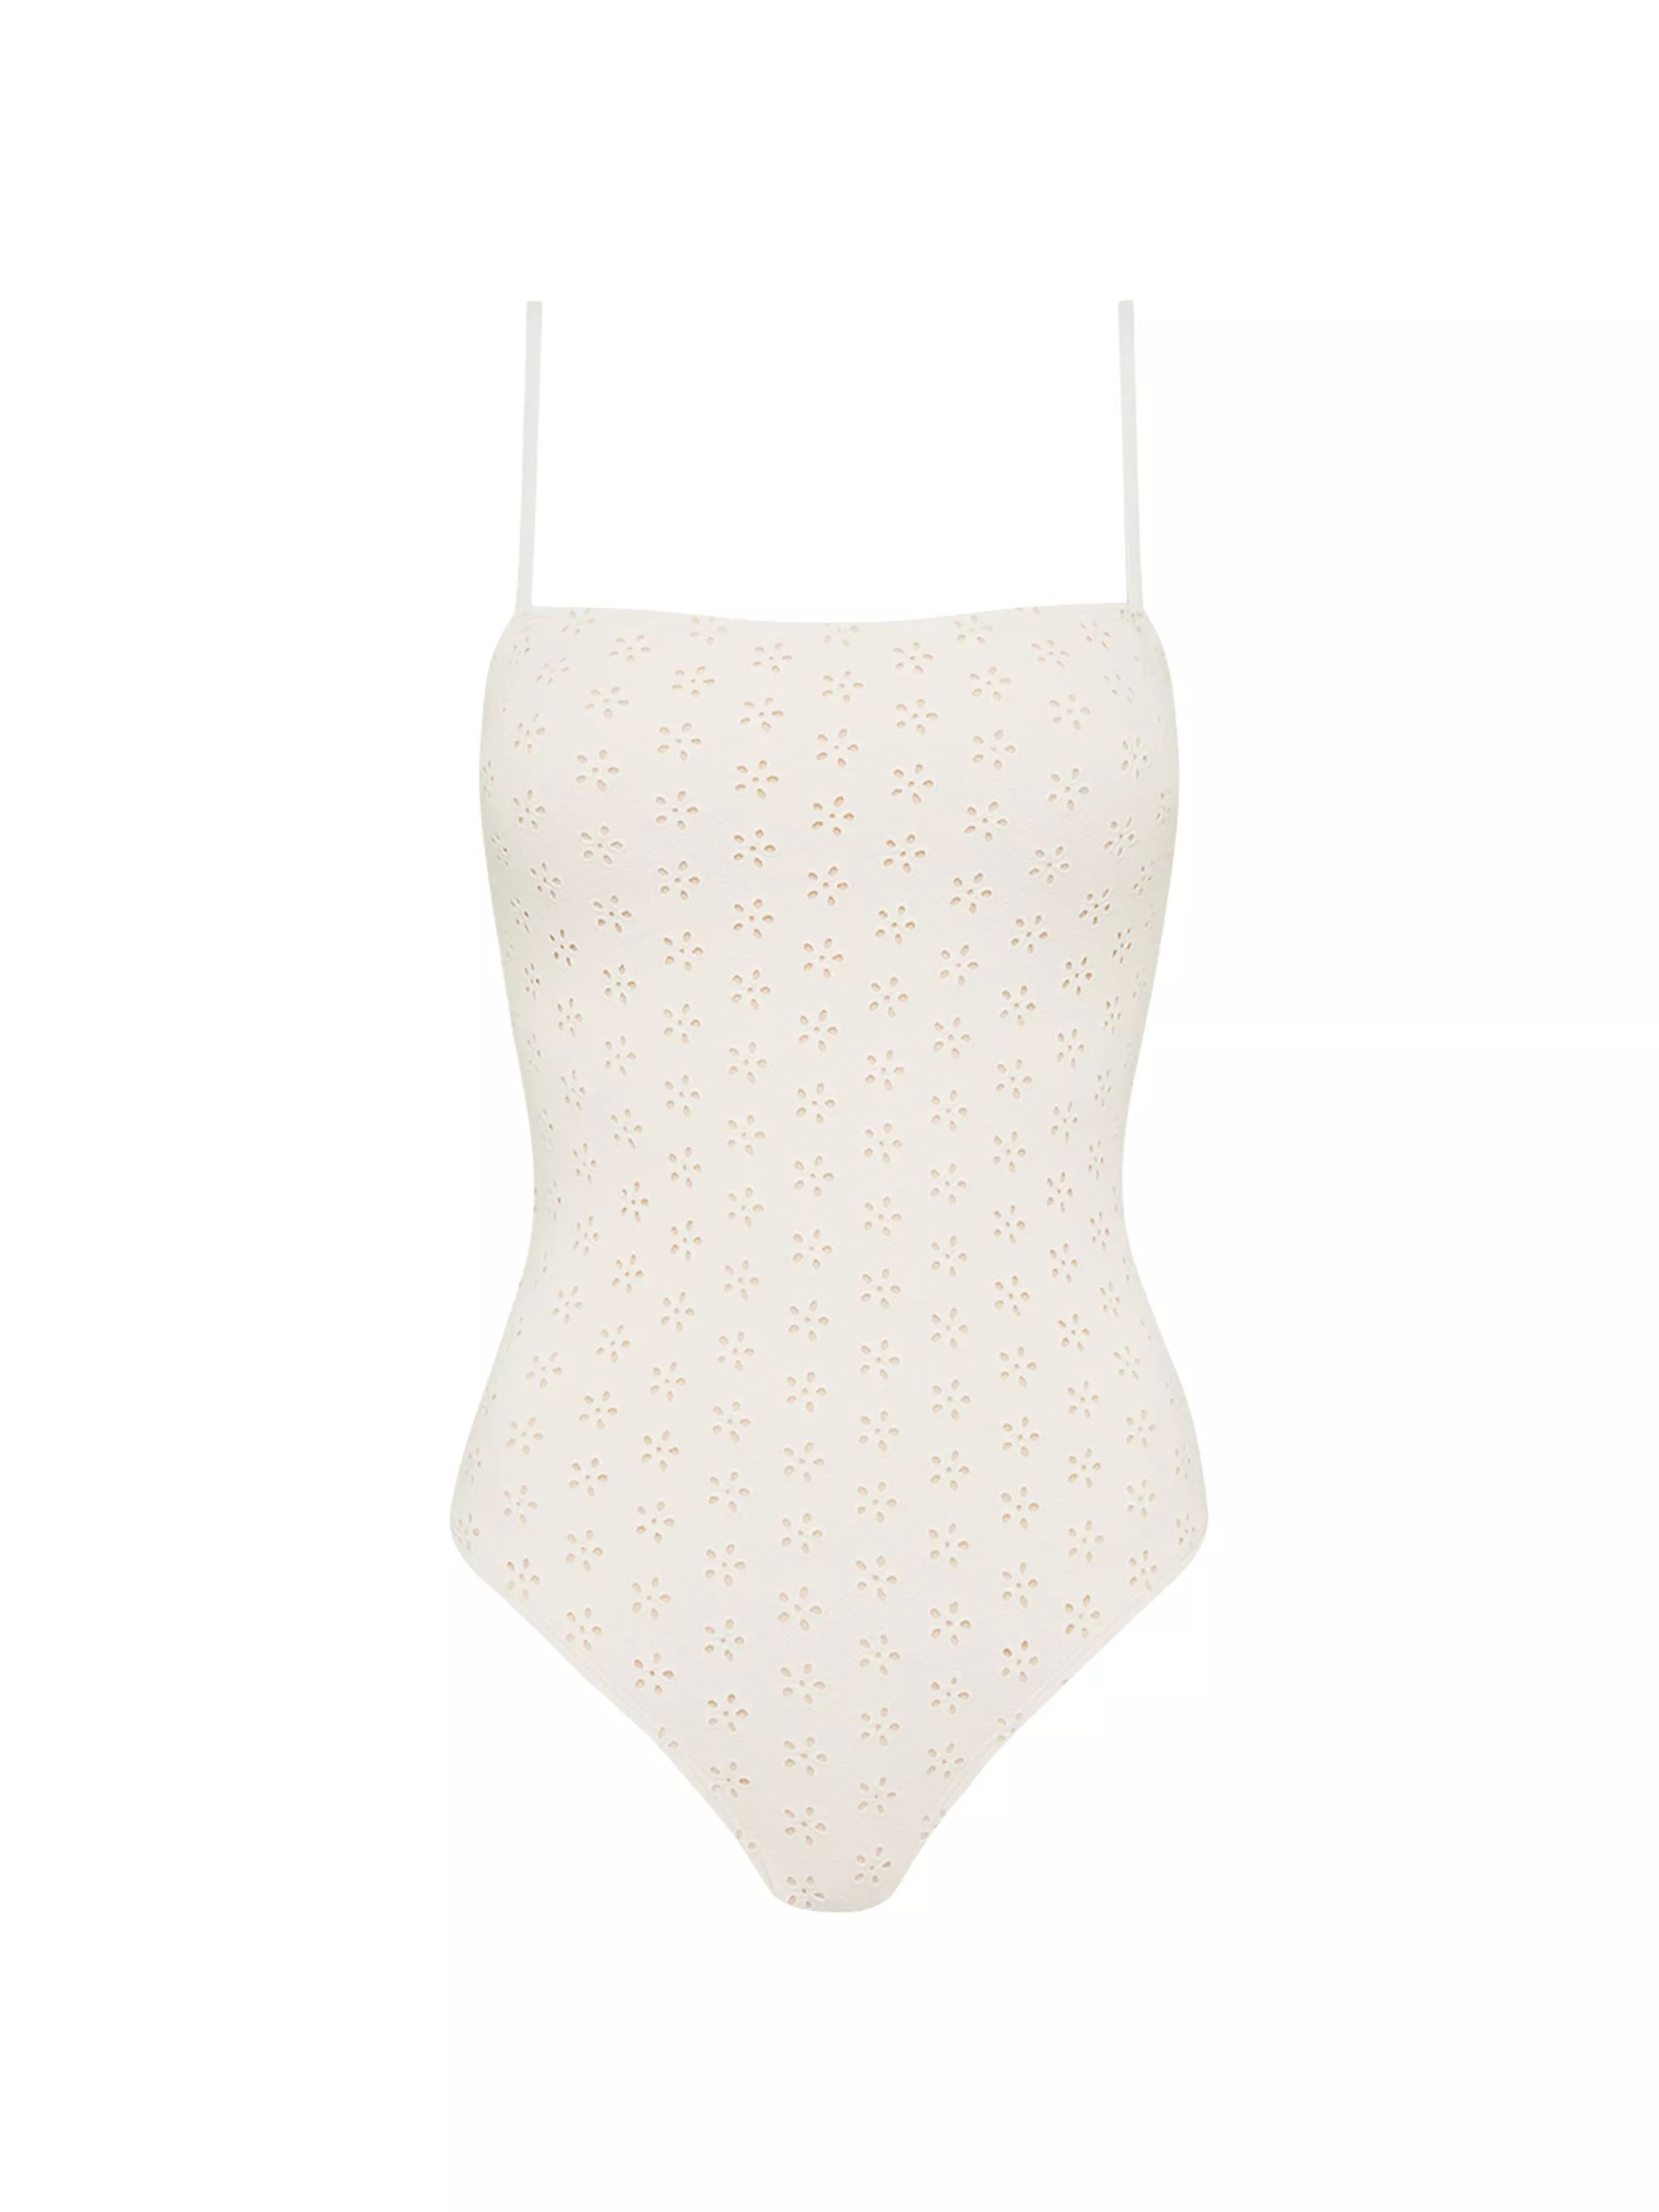 Broderie One-Piece Swimsuit | Saks Fifth Avenue